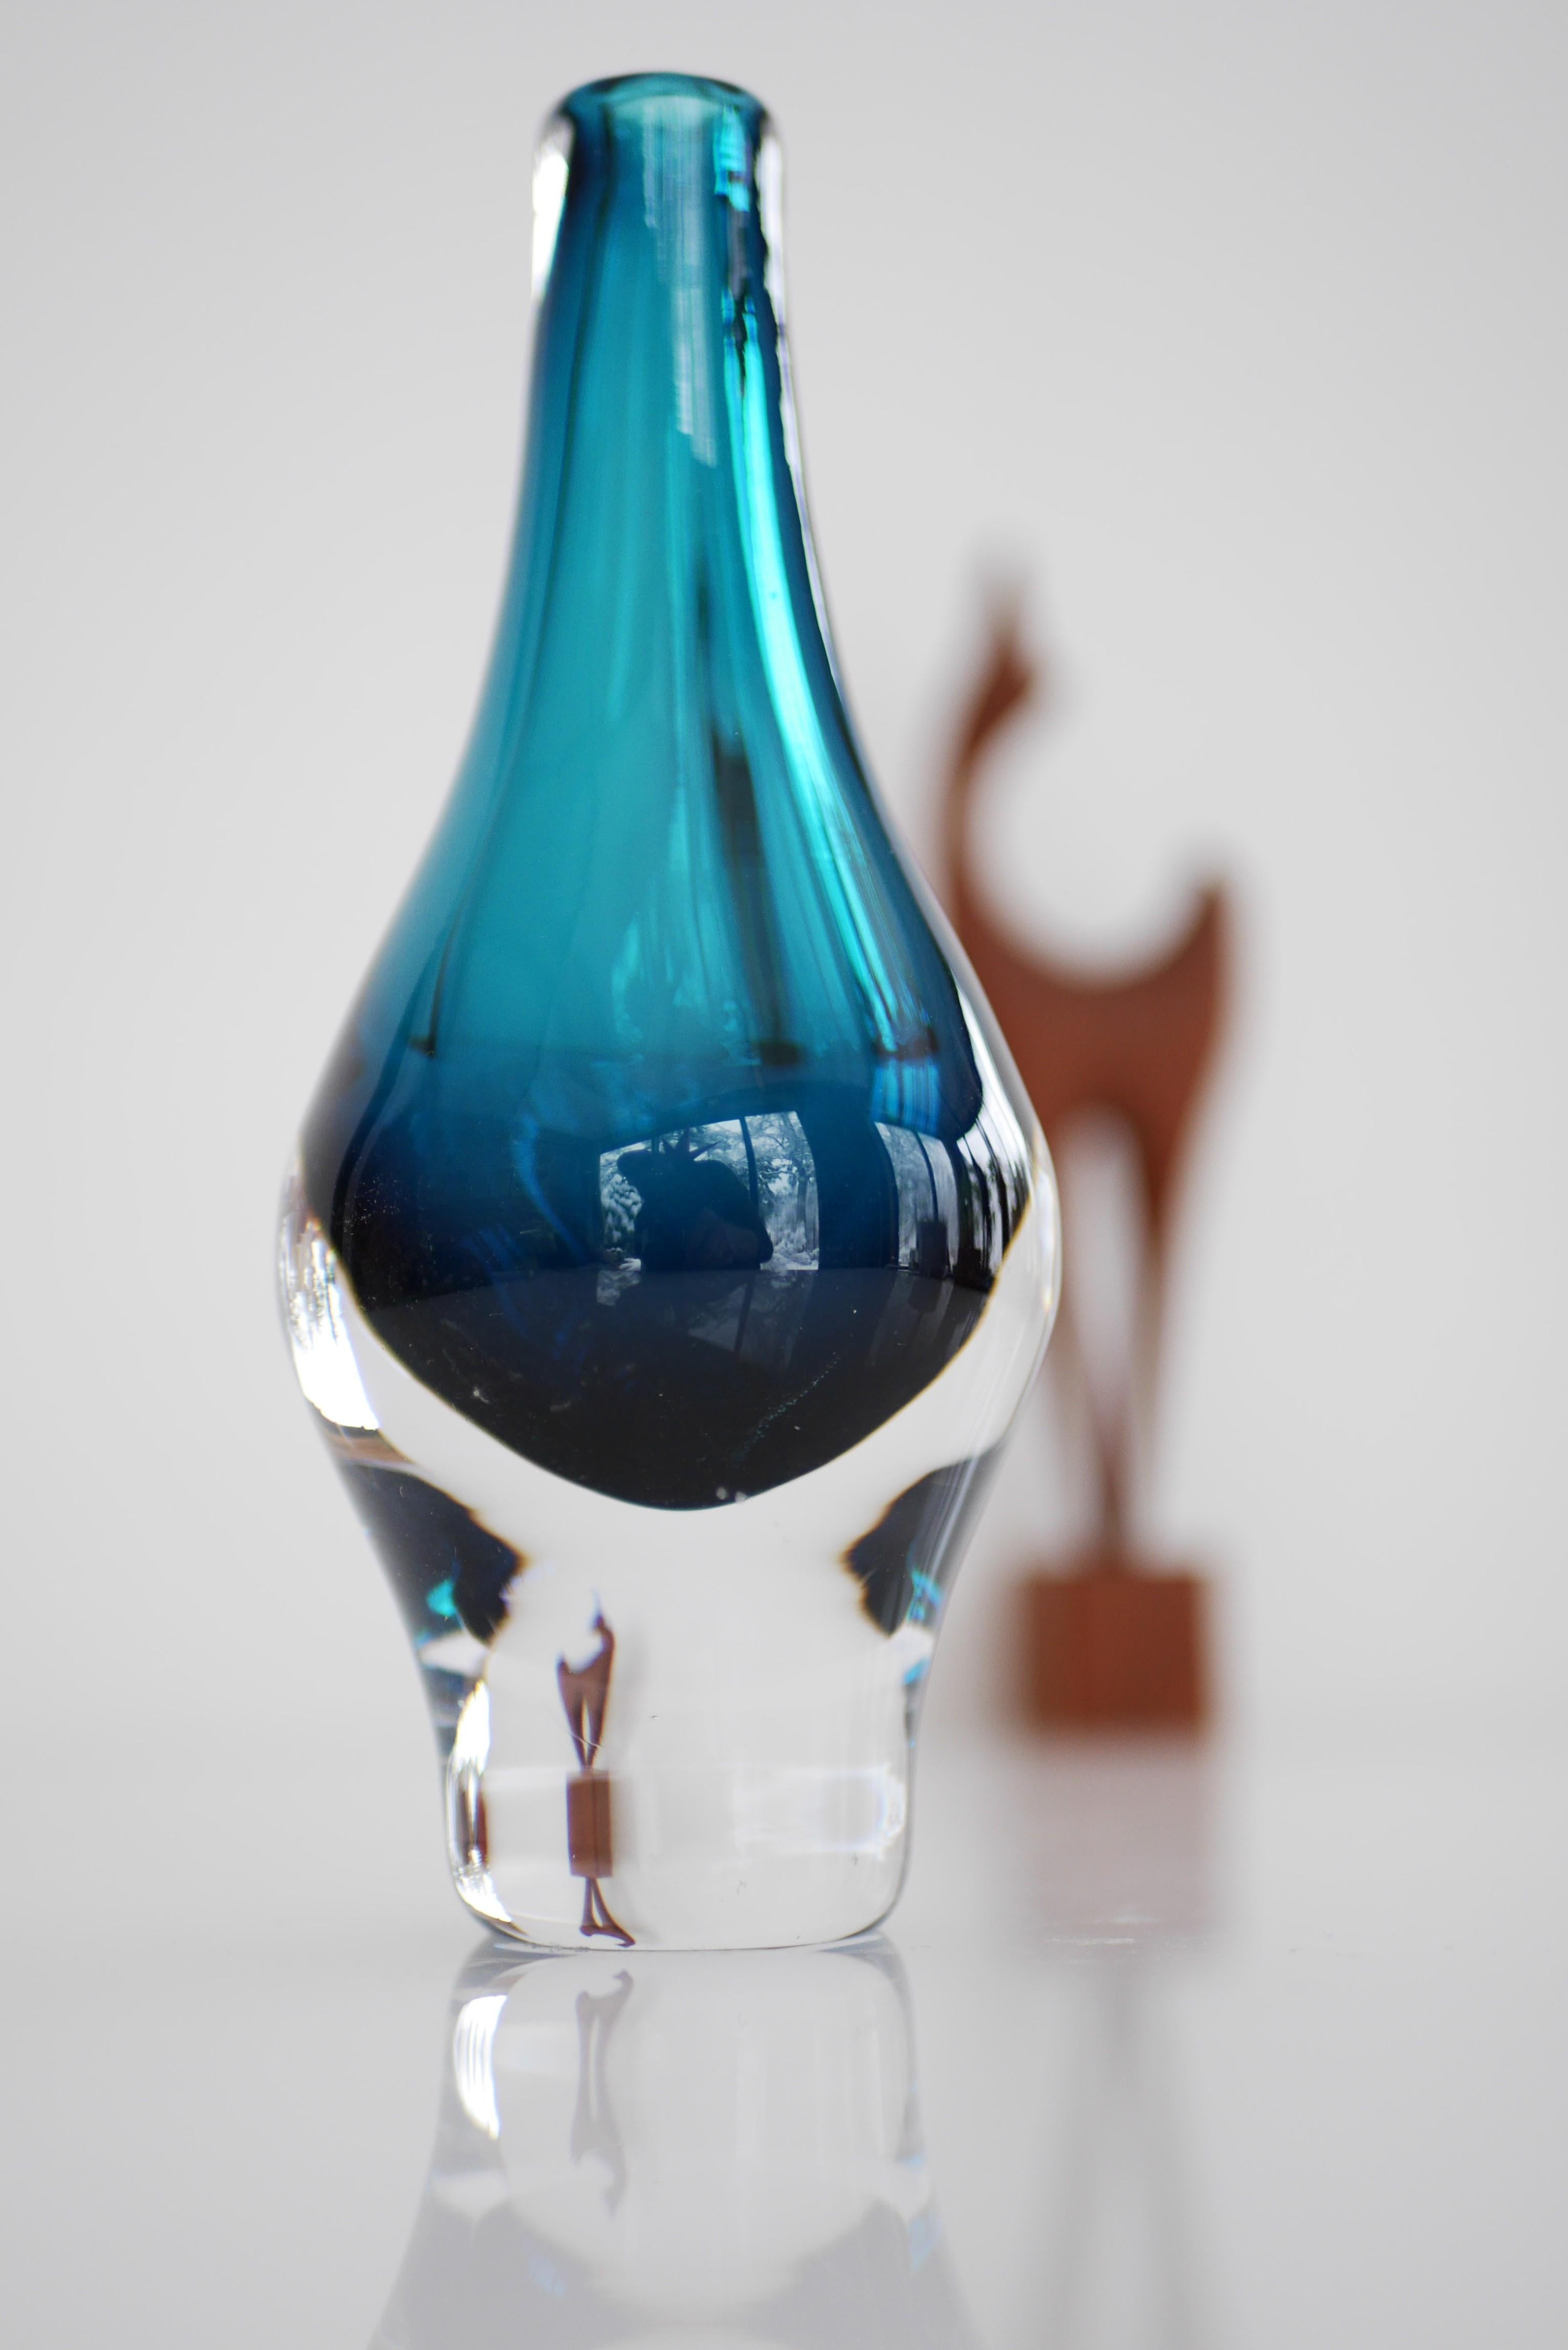 Mona Morales Schildt is regarded as one of Sweden's most talented glass designers. Her objects can be seen in museums and art galleries all over the world. Her work always holds an extremely high standard when it comes to shape, color and standard.